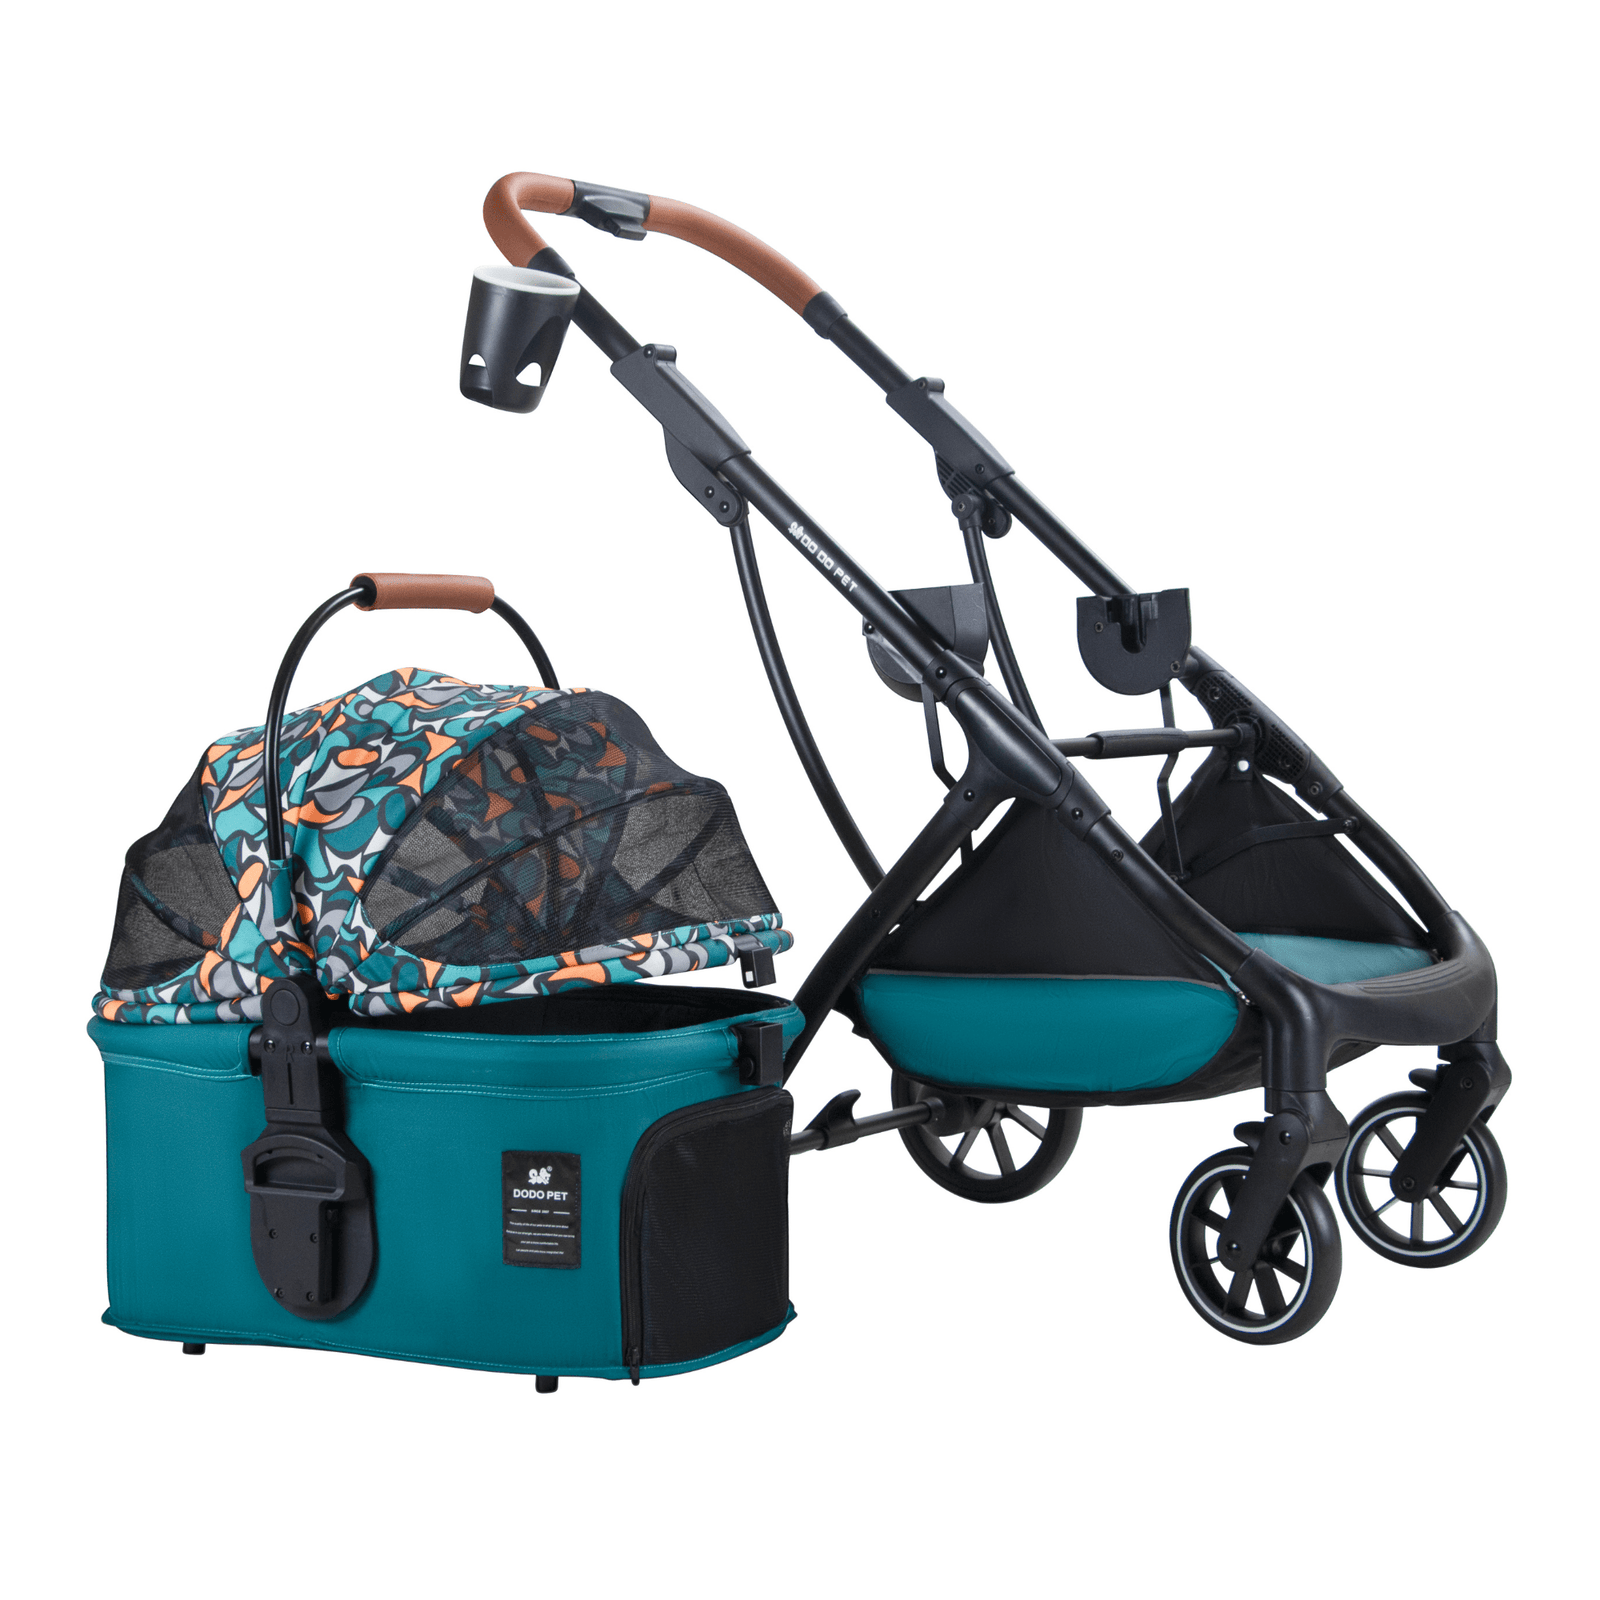 pawbella green pet pram product photo. shows basket disconnected from pet stroller